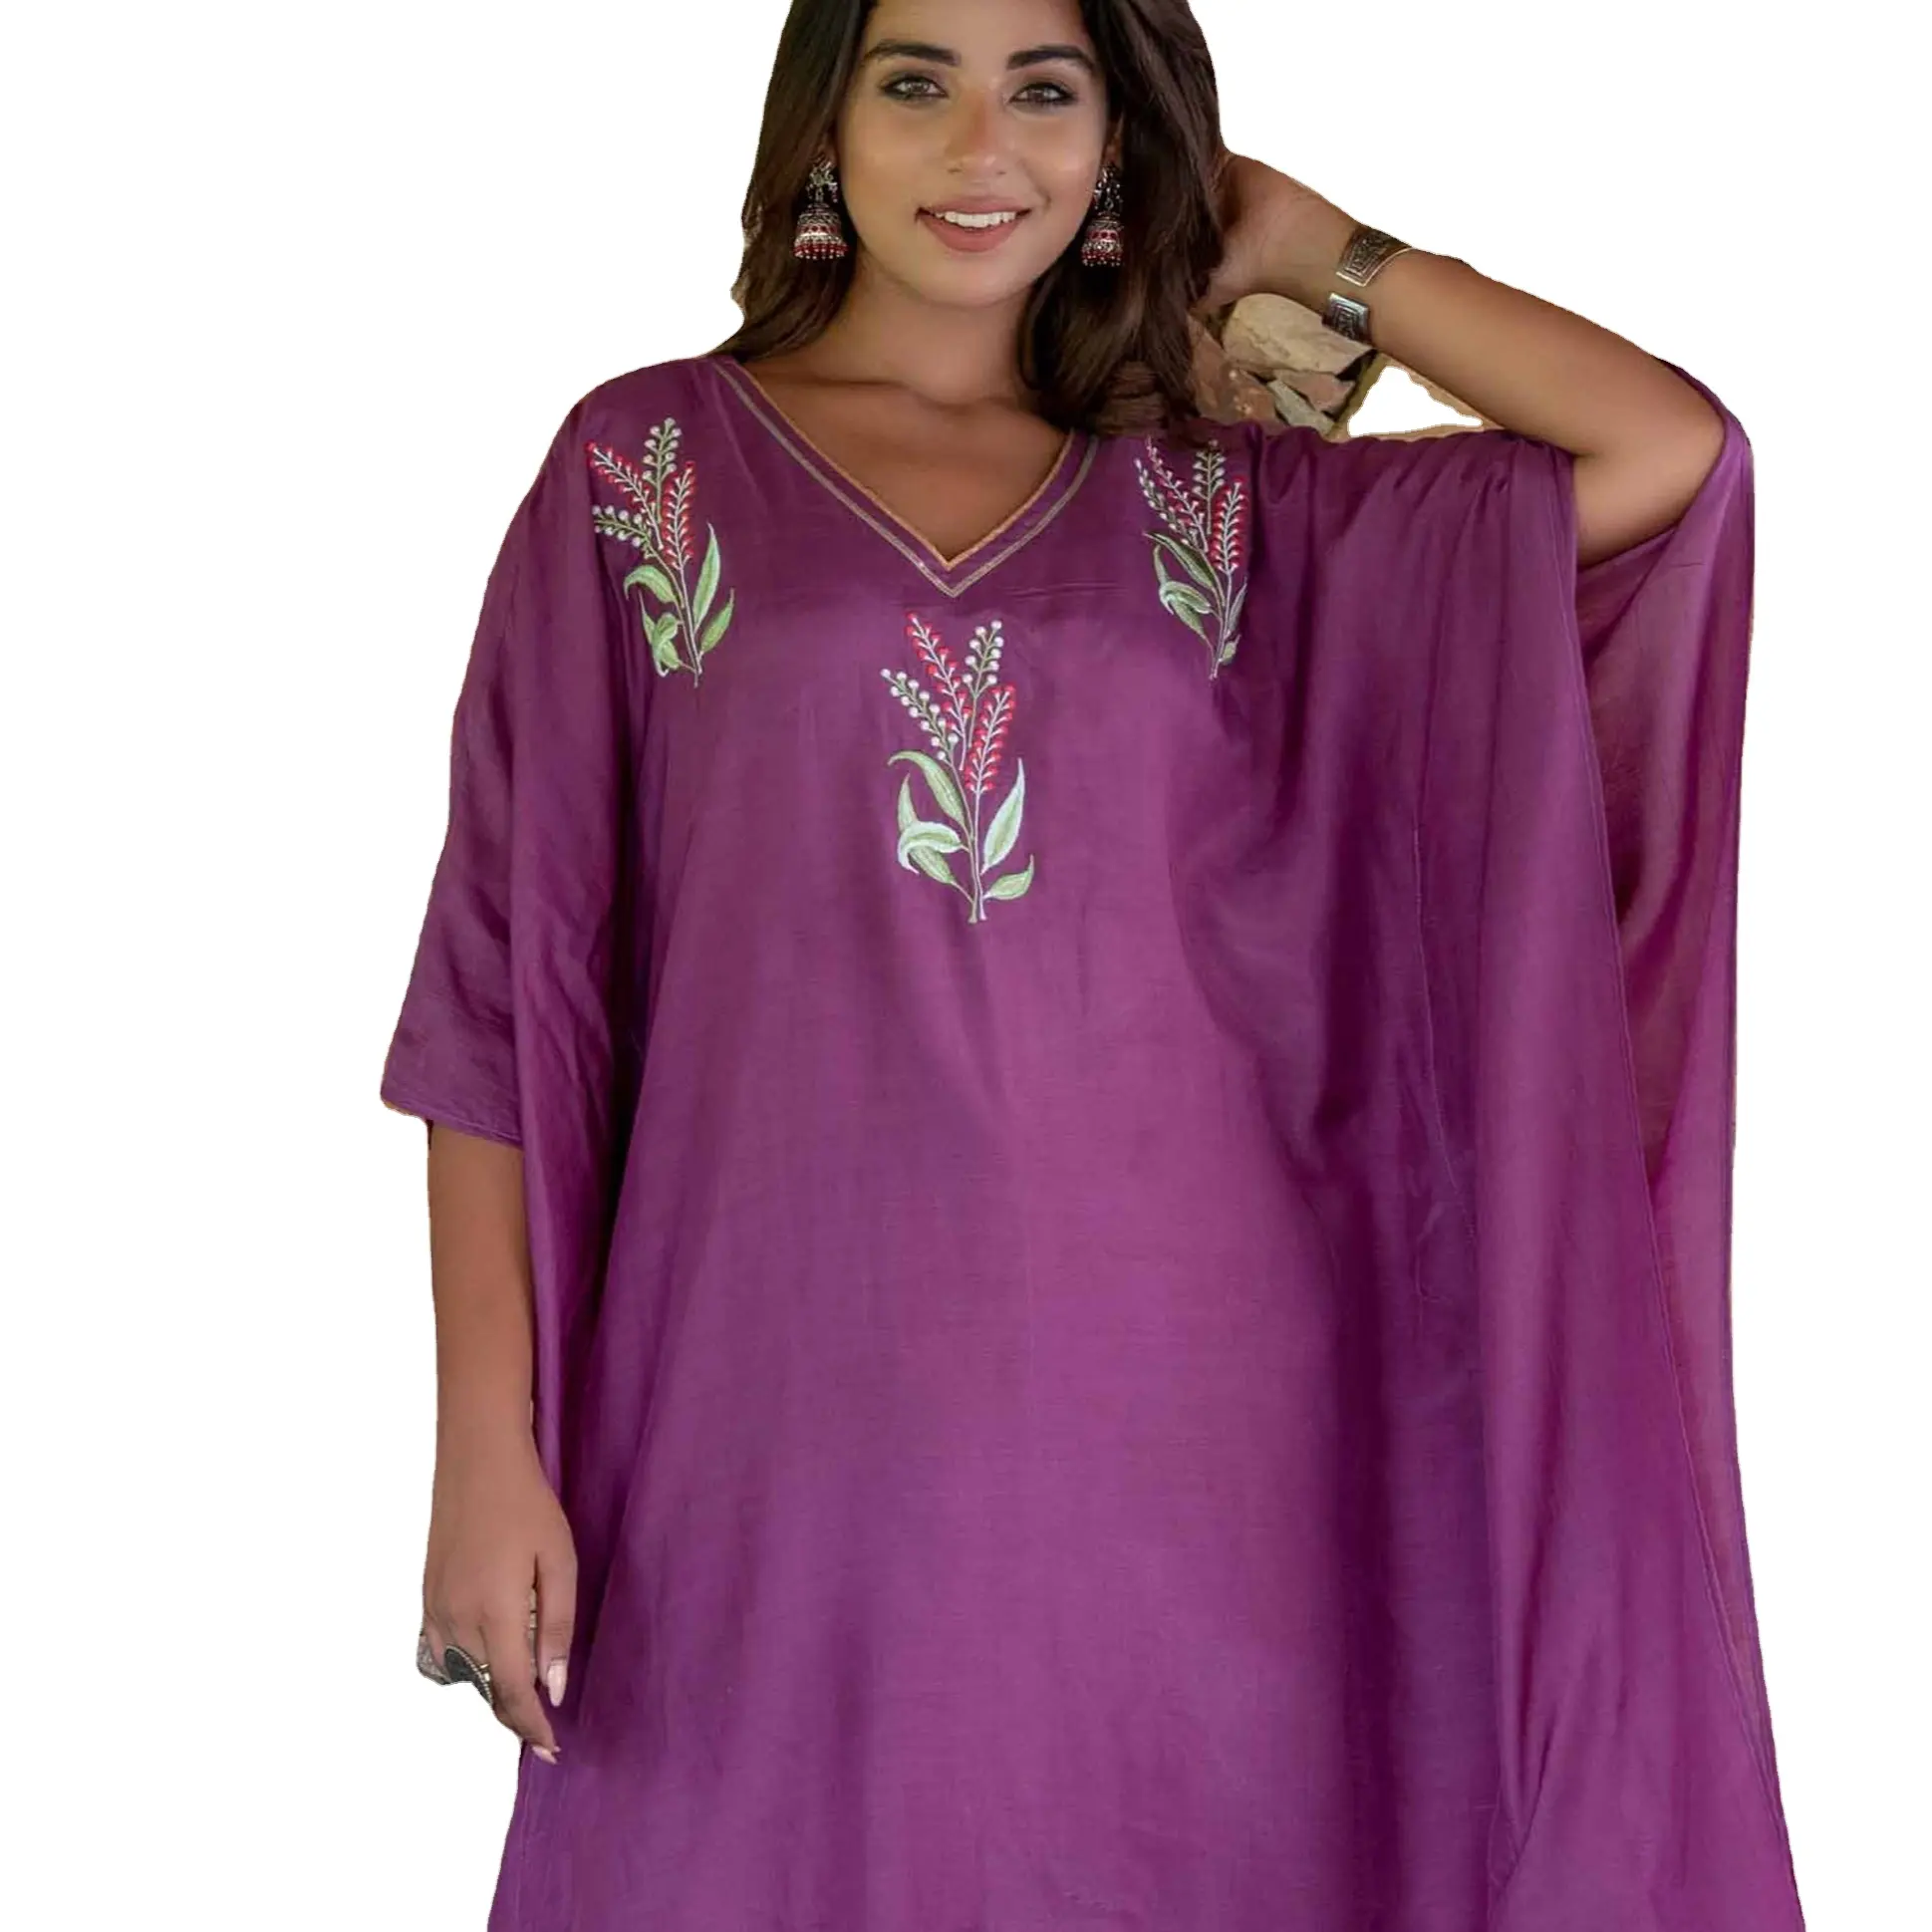 New Women Embroidered V-Neck Lace Up Three Quarter Sleeve Floral Knit kaftan